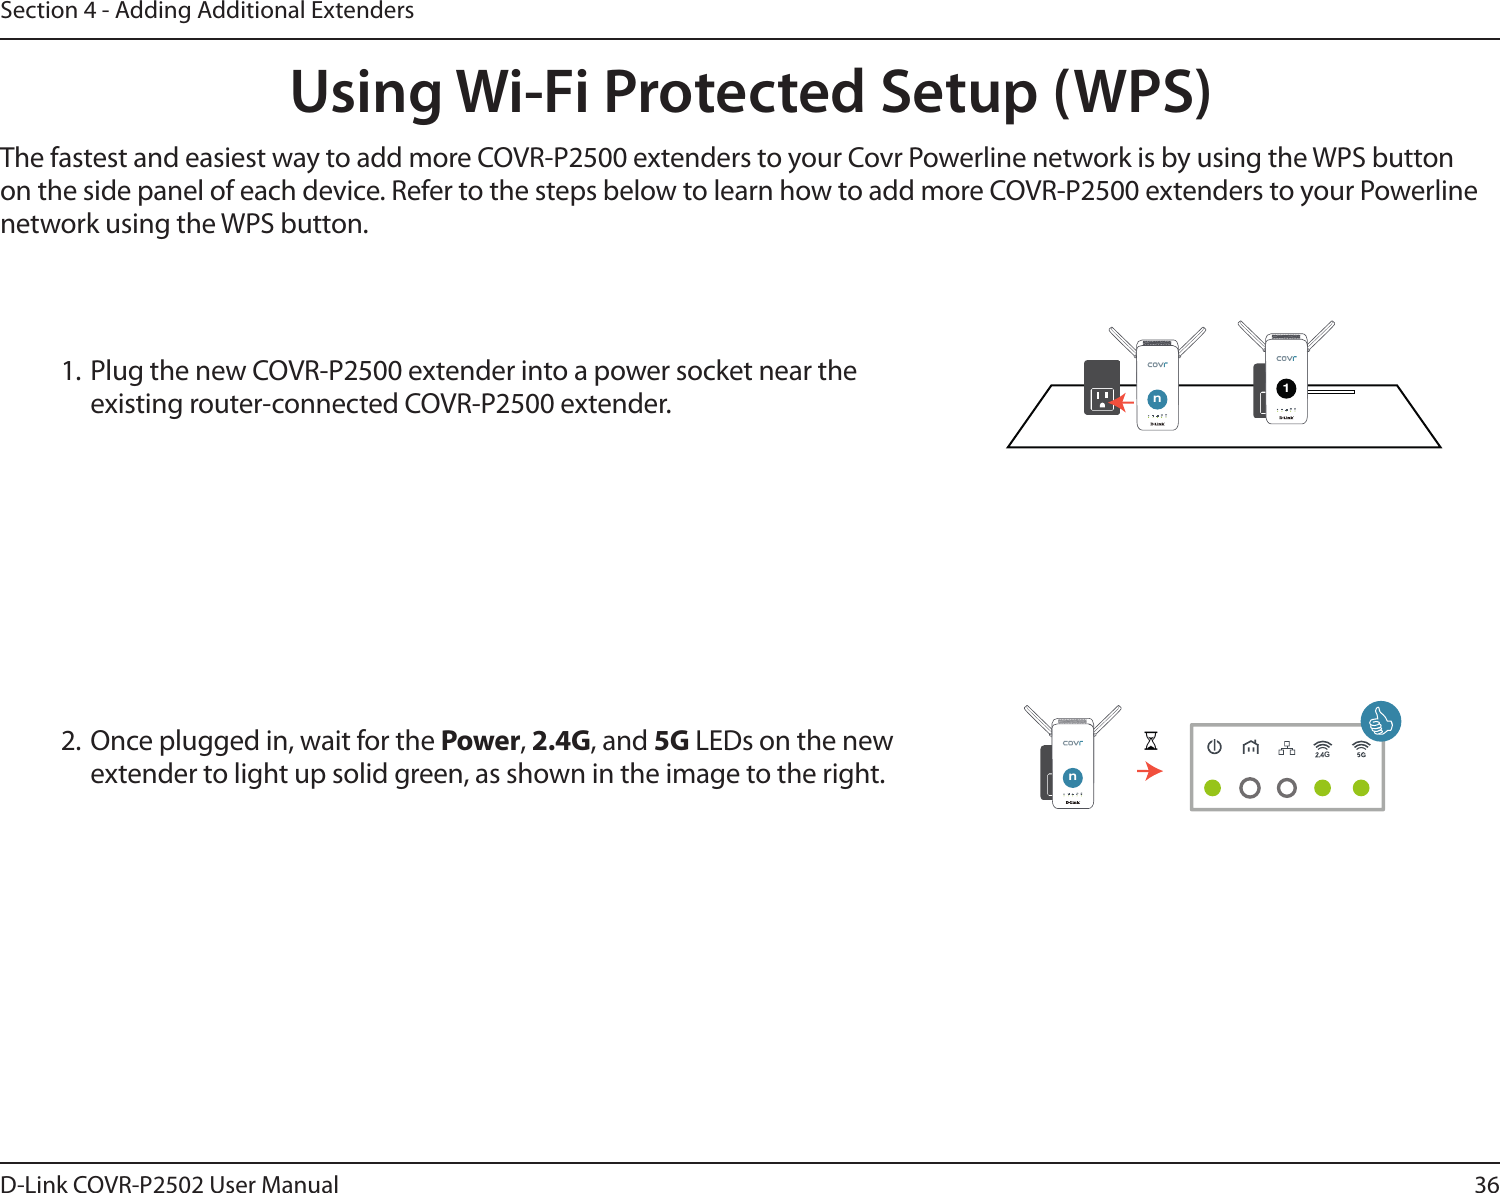 36D-Link COVR-P2502 User ManualSection 4 - Adding Additional ExtendersUsing Wi-Fi Protected Setup (WPS)The fastest and easiest way to add more COVR-P2500 extenders to your Covr Powerline network is by using the WPS button on the side panel of each device. Refer to the steps below to learn how to add more COVR-P2500 extenders to your Powerline network using the WPS button.2. Once plugged in, wait for the Power, 2.4G, and 5G LEDs on the new extender to light up solid green, as shown in the image to the right.1. Plug the new COVR-P2500 extender into a power socket near the existing router-connected COVR-P2500 extender. G1GnGGnG